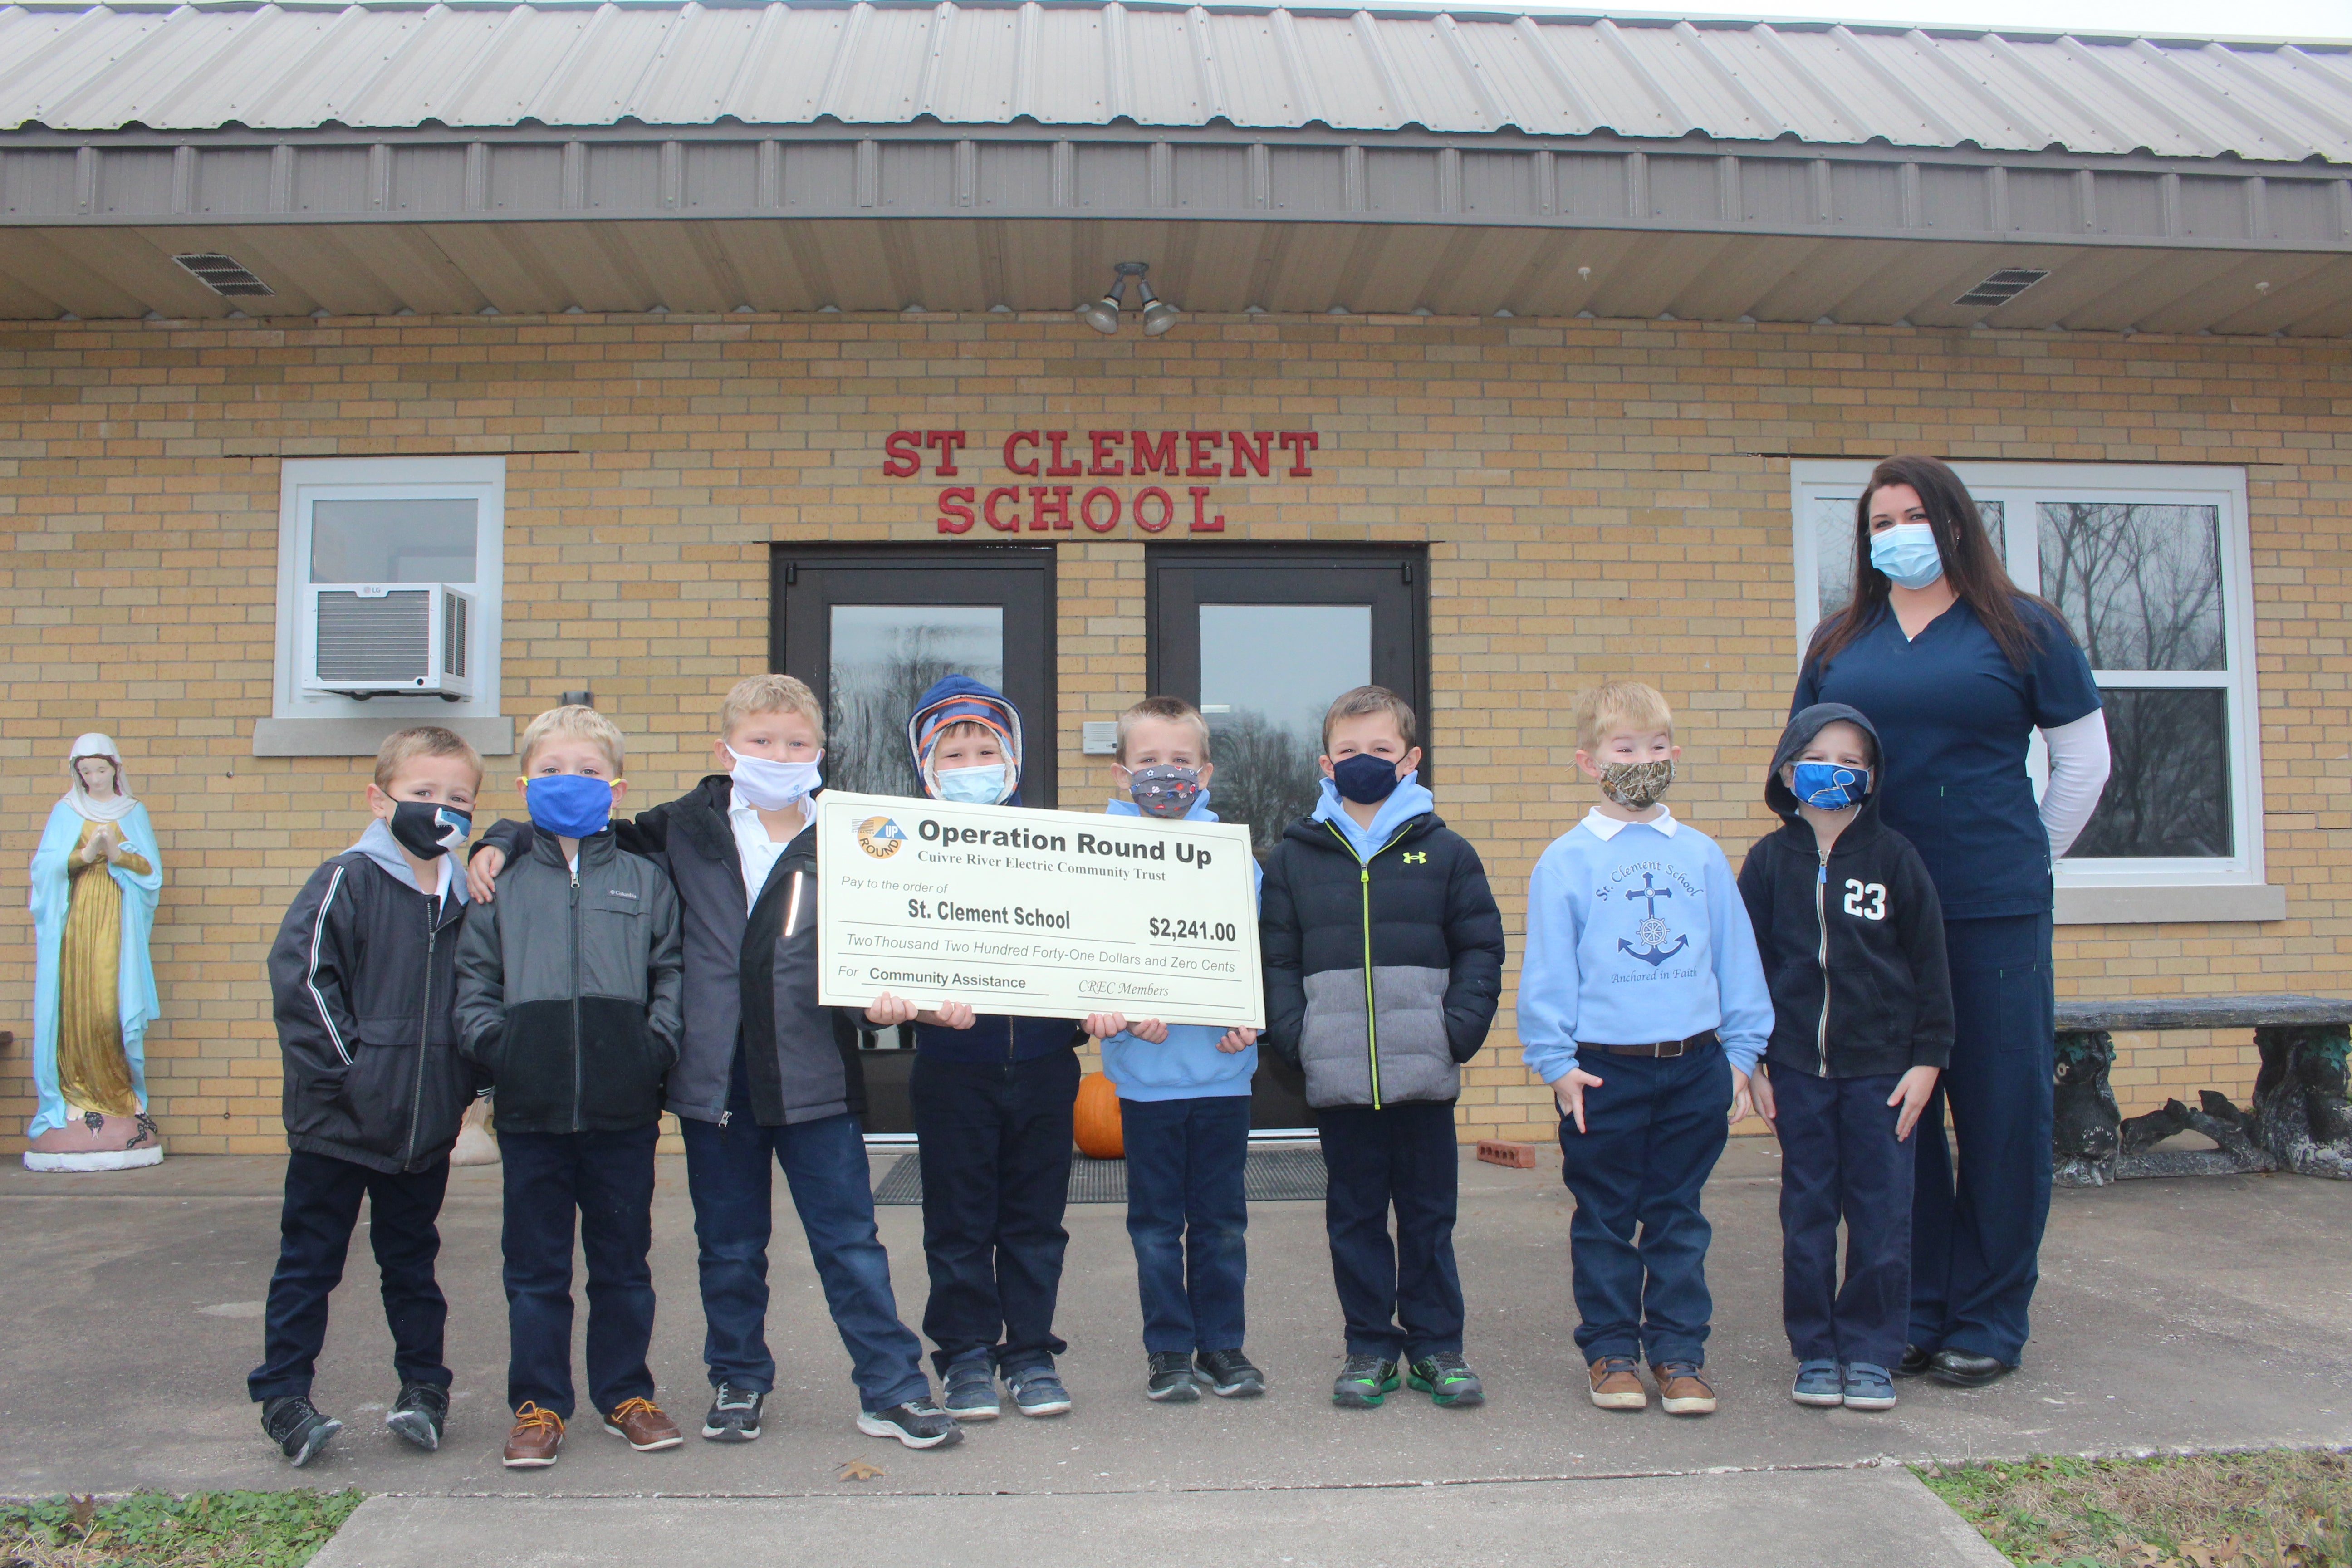 St. Clements School receives $2,241 from Operation Round Up